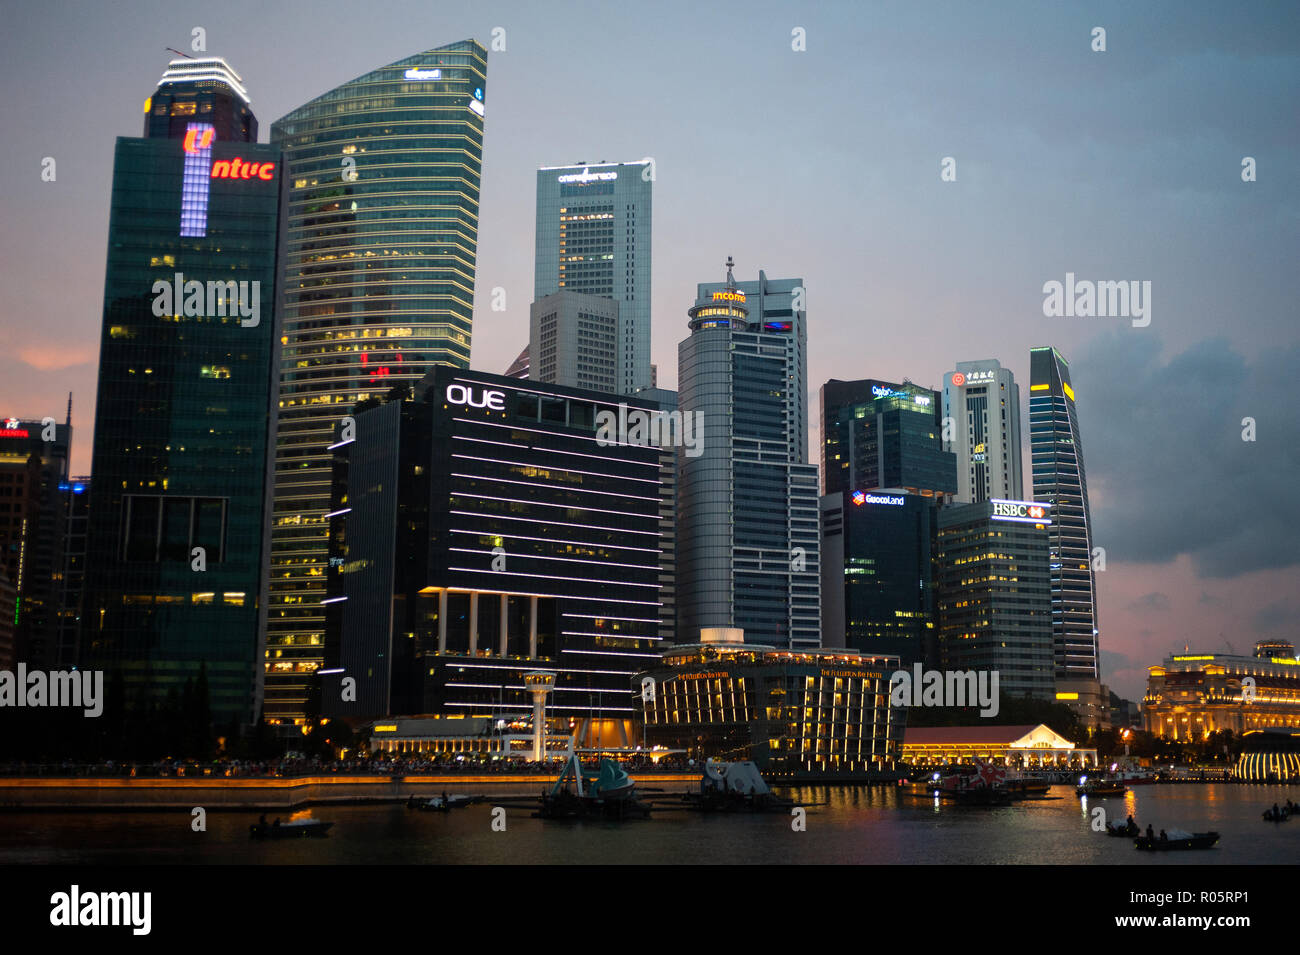 Singapore, Republic of Singapore, skyscrapers of the business district Stock Photo